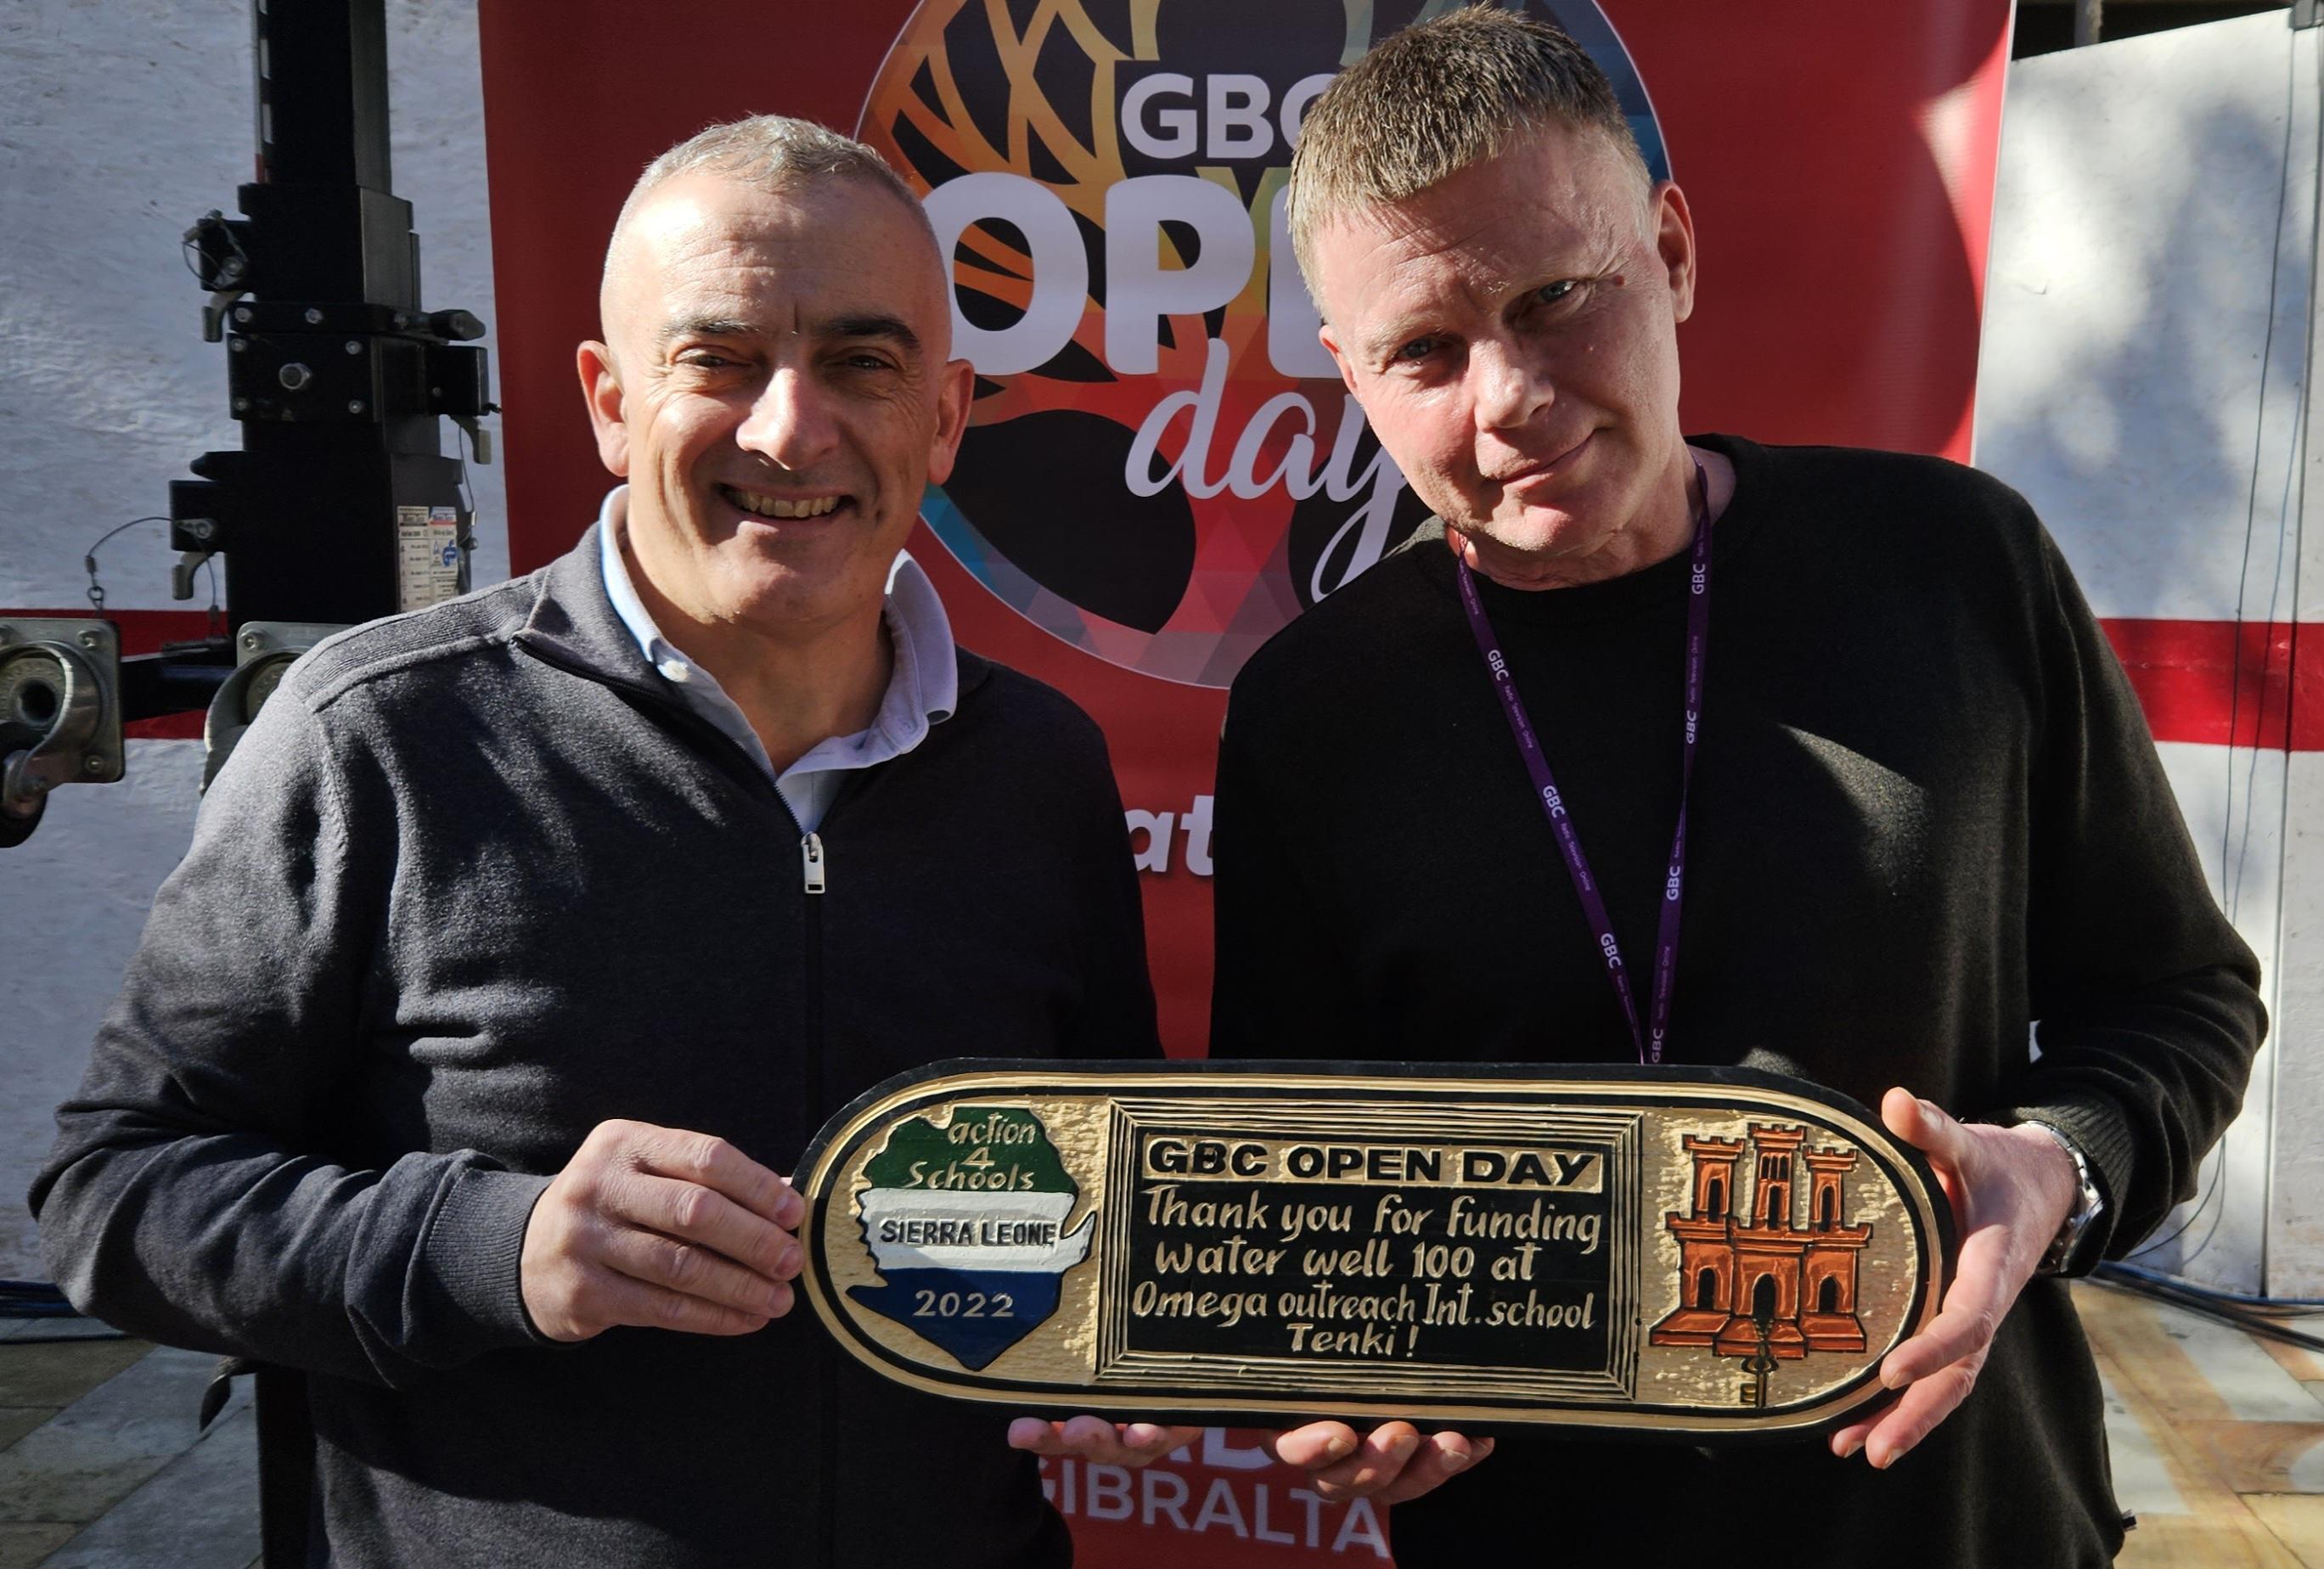 Plaque for well 100 presented to Ian Daniels Head of GBC Radio on GBC Open Day 2023 by Jimmy Bruzon Founder of Action4schools-Sierra Leone charity